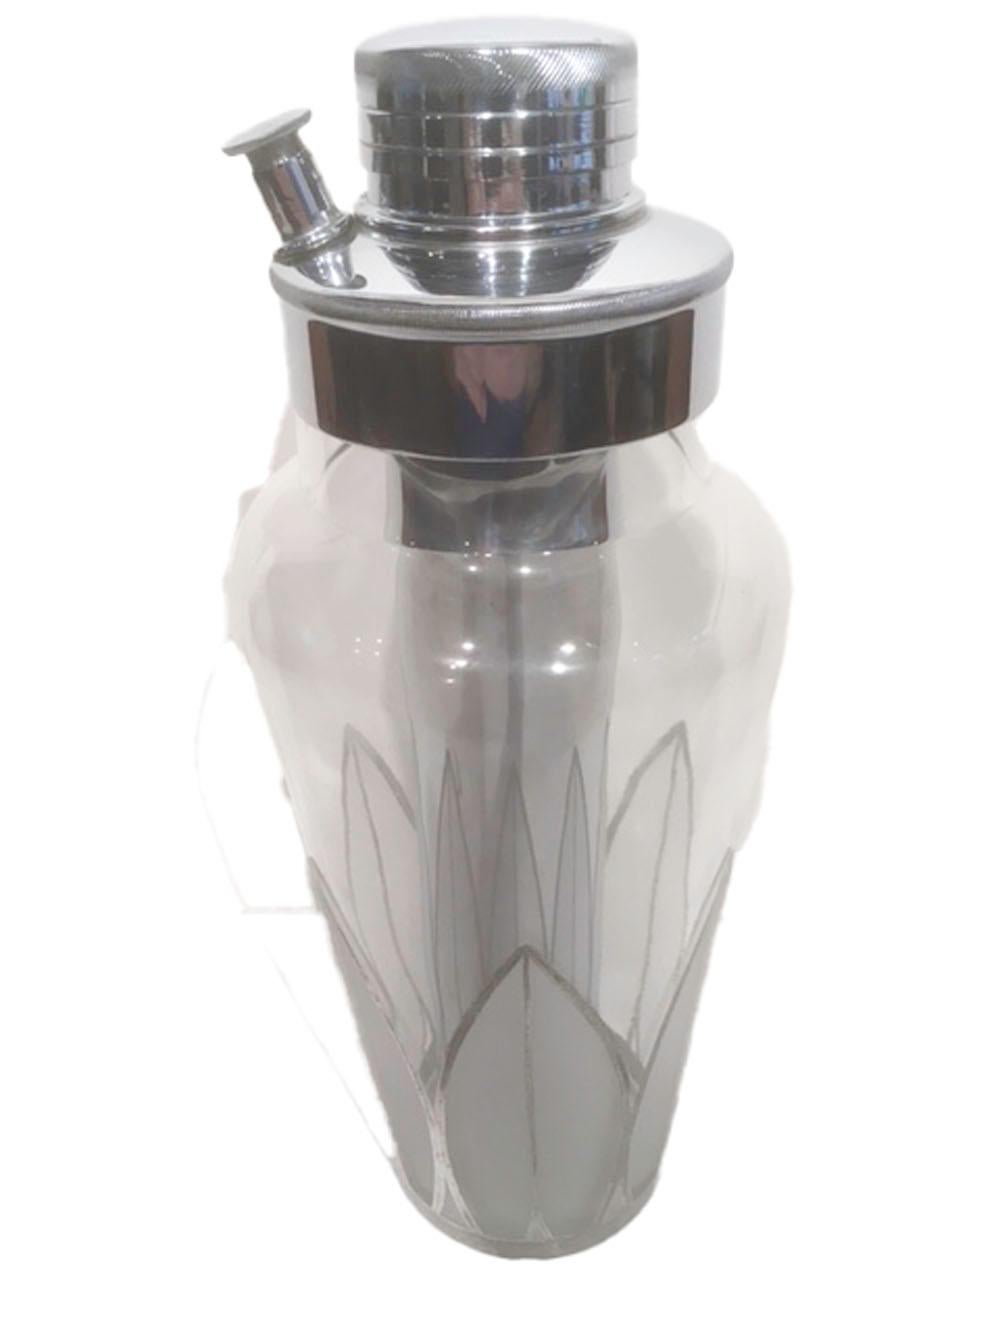 Vintage cocktail shaker of clear glass decorated on the lower half with palmettes of frosted fronds outlined with sterling overlay. The chrome lid has an attached ice reservoir which extends to the base of the shaker and reflects the palmettes as